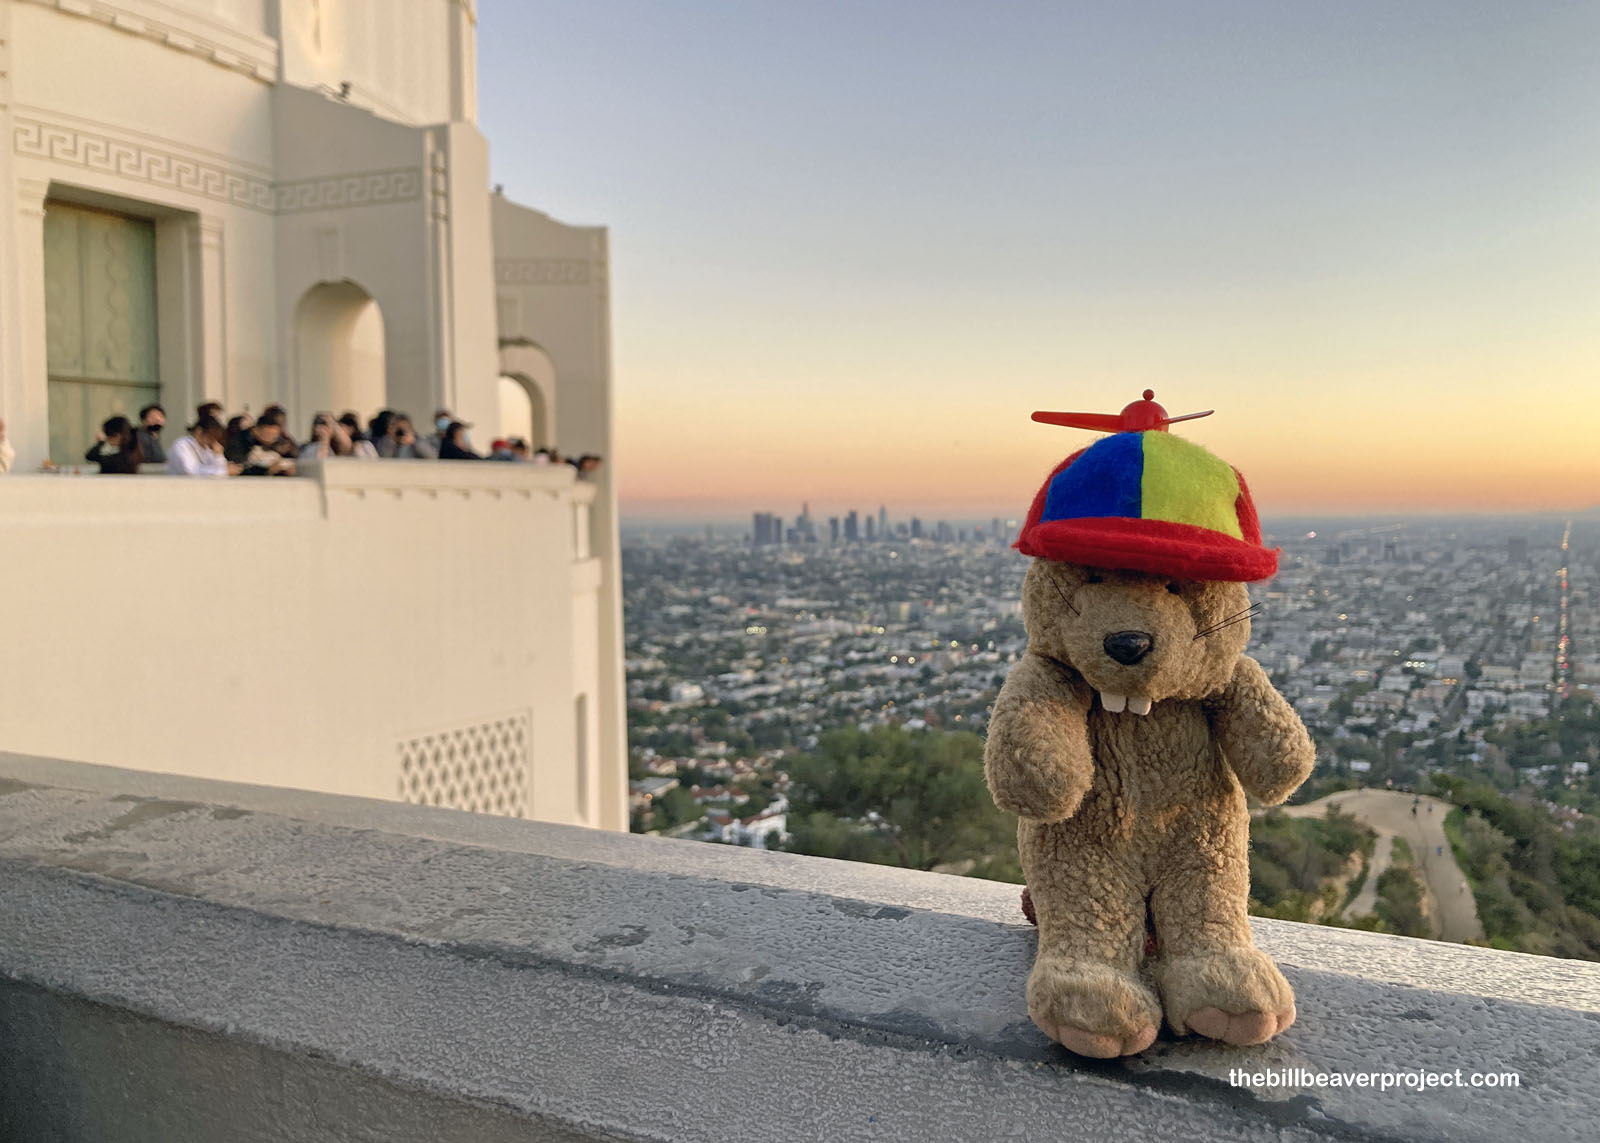 One of Los Angeles' most famous views!